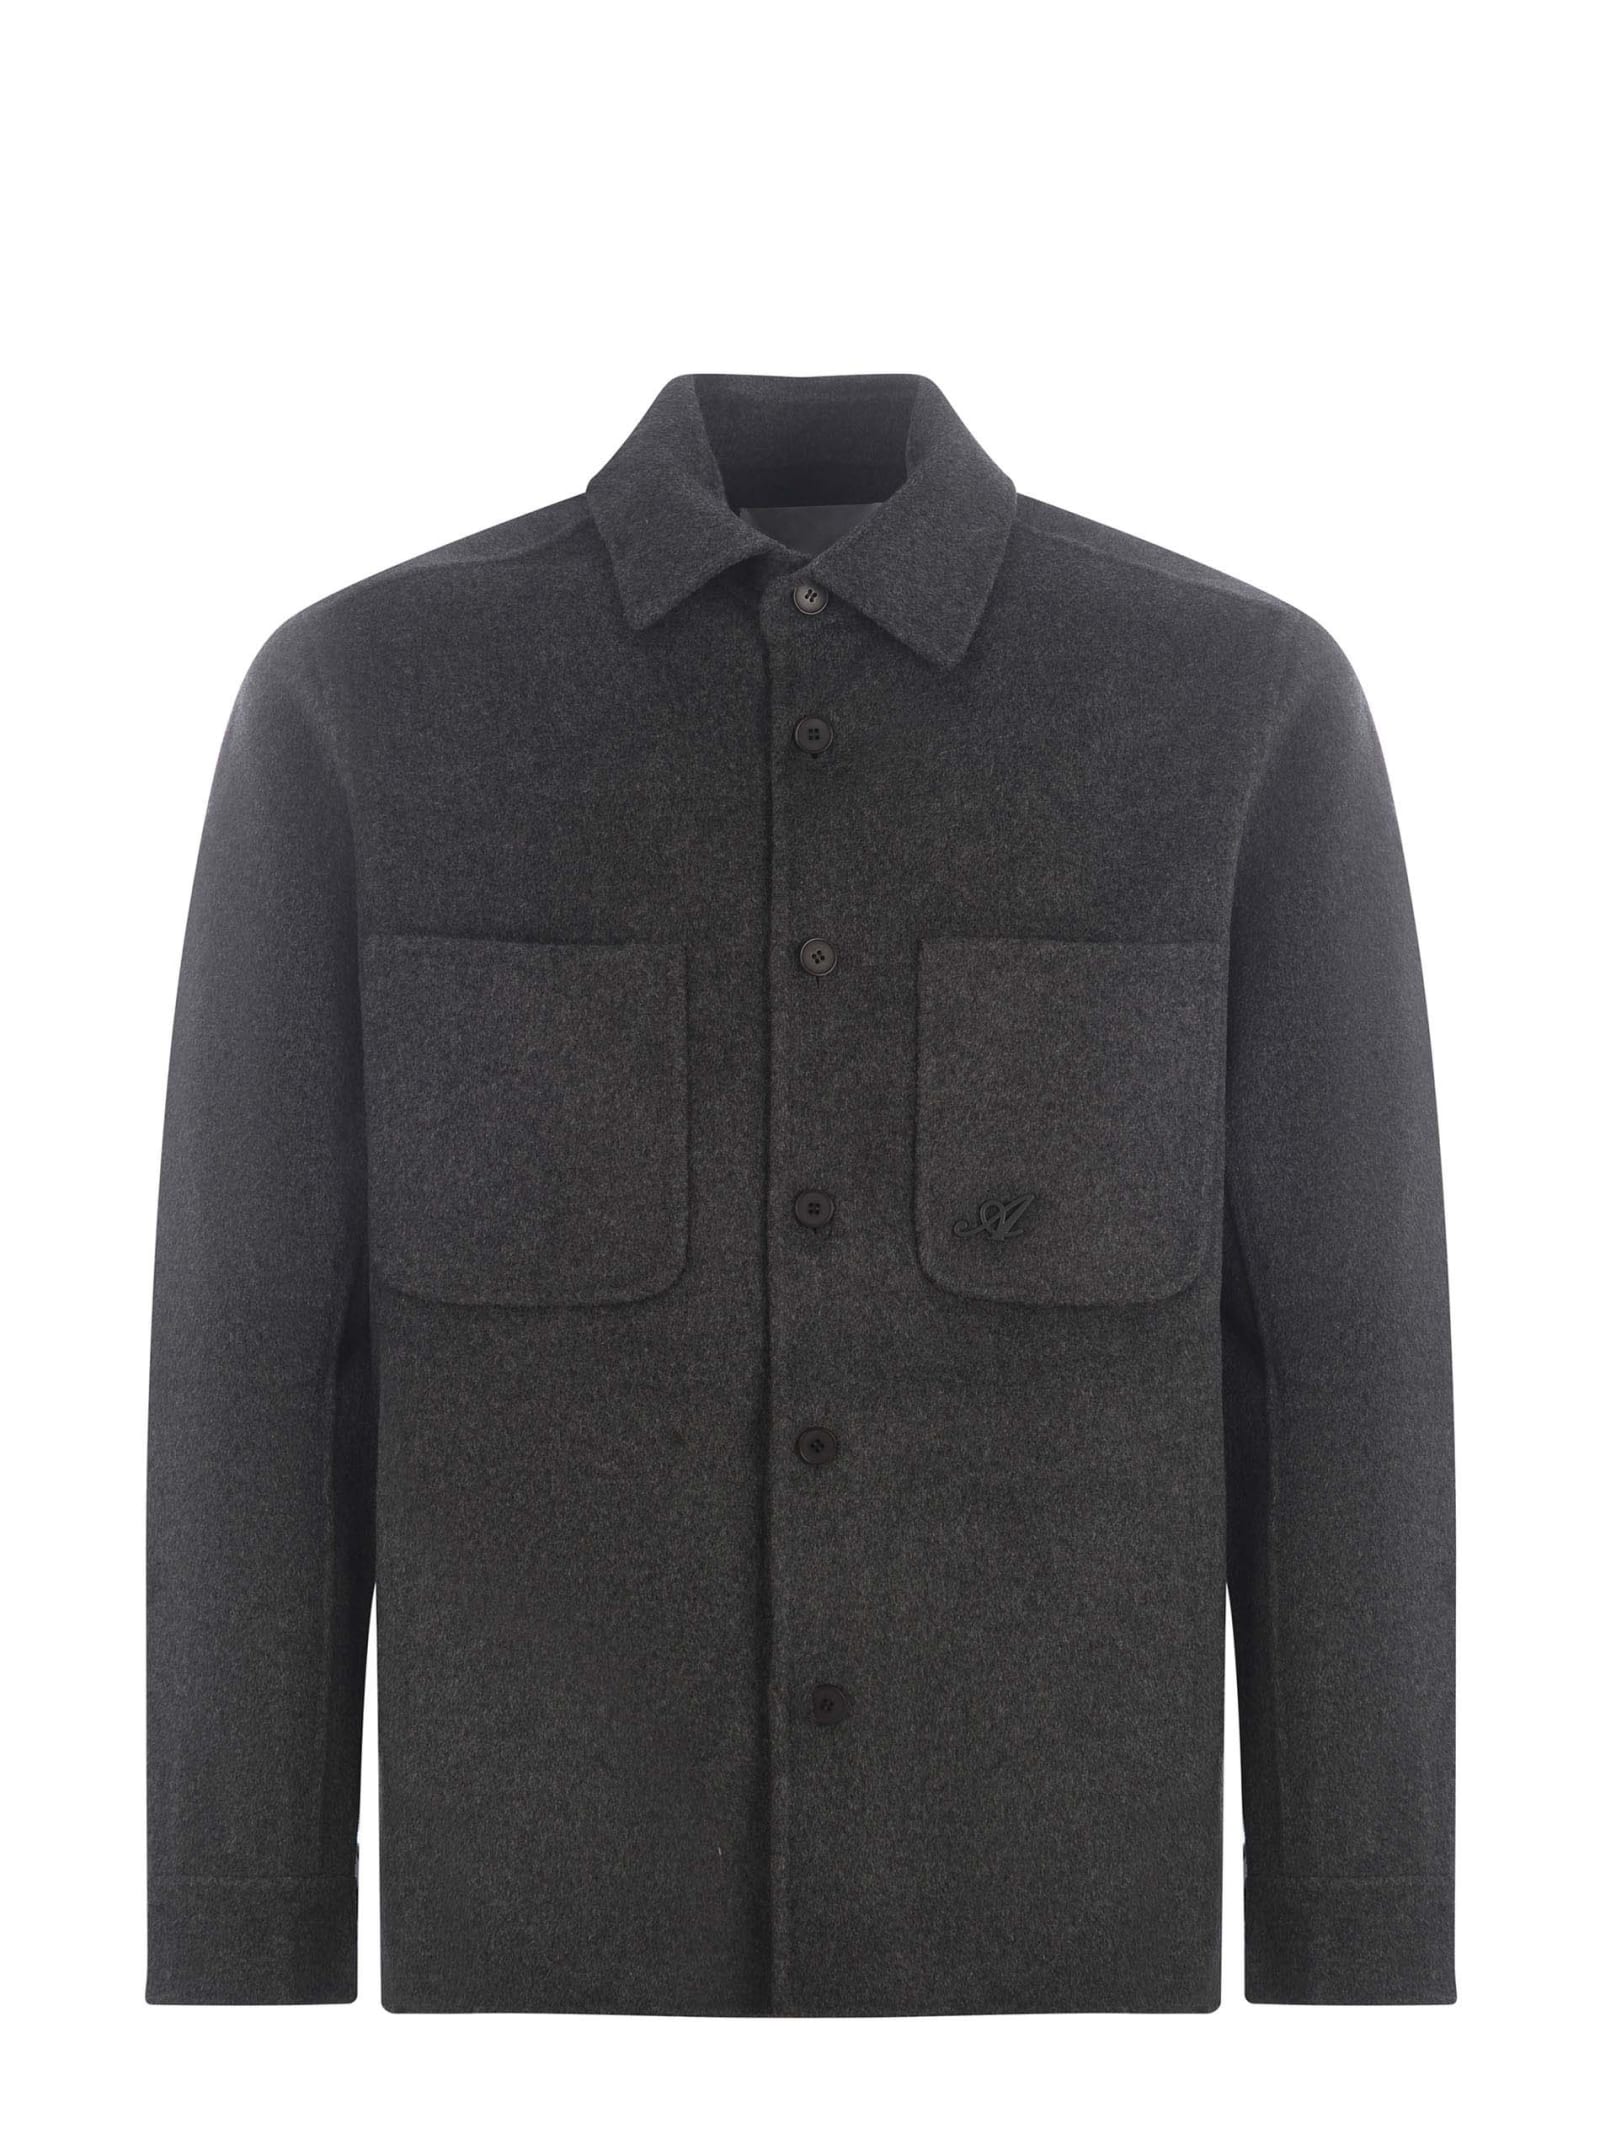 Shirt Axel Arigato release Wool In Wool And Cashmere